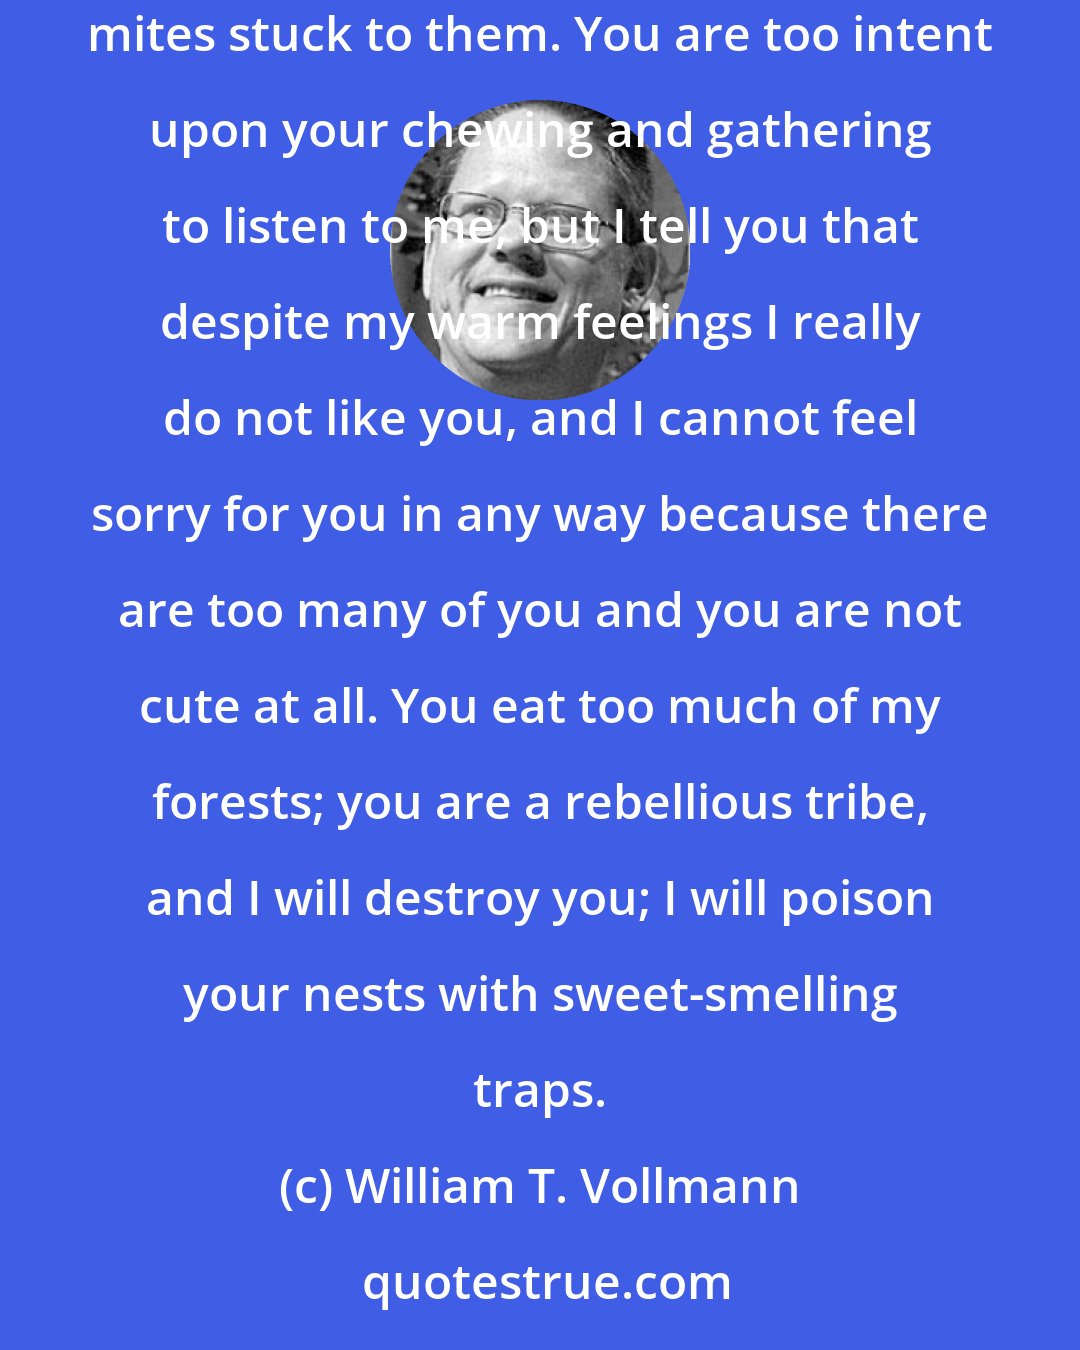 William T. Vollmann: Oh, ants, my sisters, good old honeydew-seekers! From close up you are sticky and shiny and gristly; and your nymphs have parasitic red mites stuck to them. You are too intent upon your chewing and gathering to listen to me, but I tell you that despite my warm feelings I really do not like you, and I cannot feel sorry for you in any way because there are too many of you and you are not cute at all. You eat too much of my forests; you are a rebellious tribe, and I will destroy you; I will poison your nests with sweet-smelling traps.